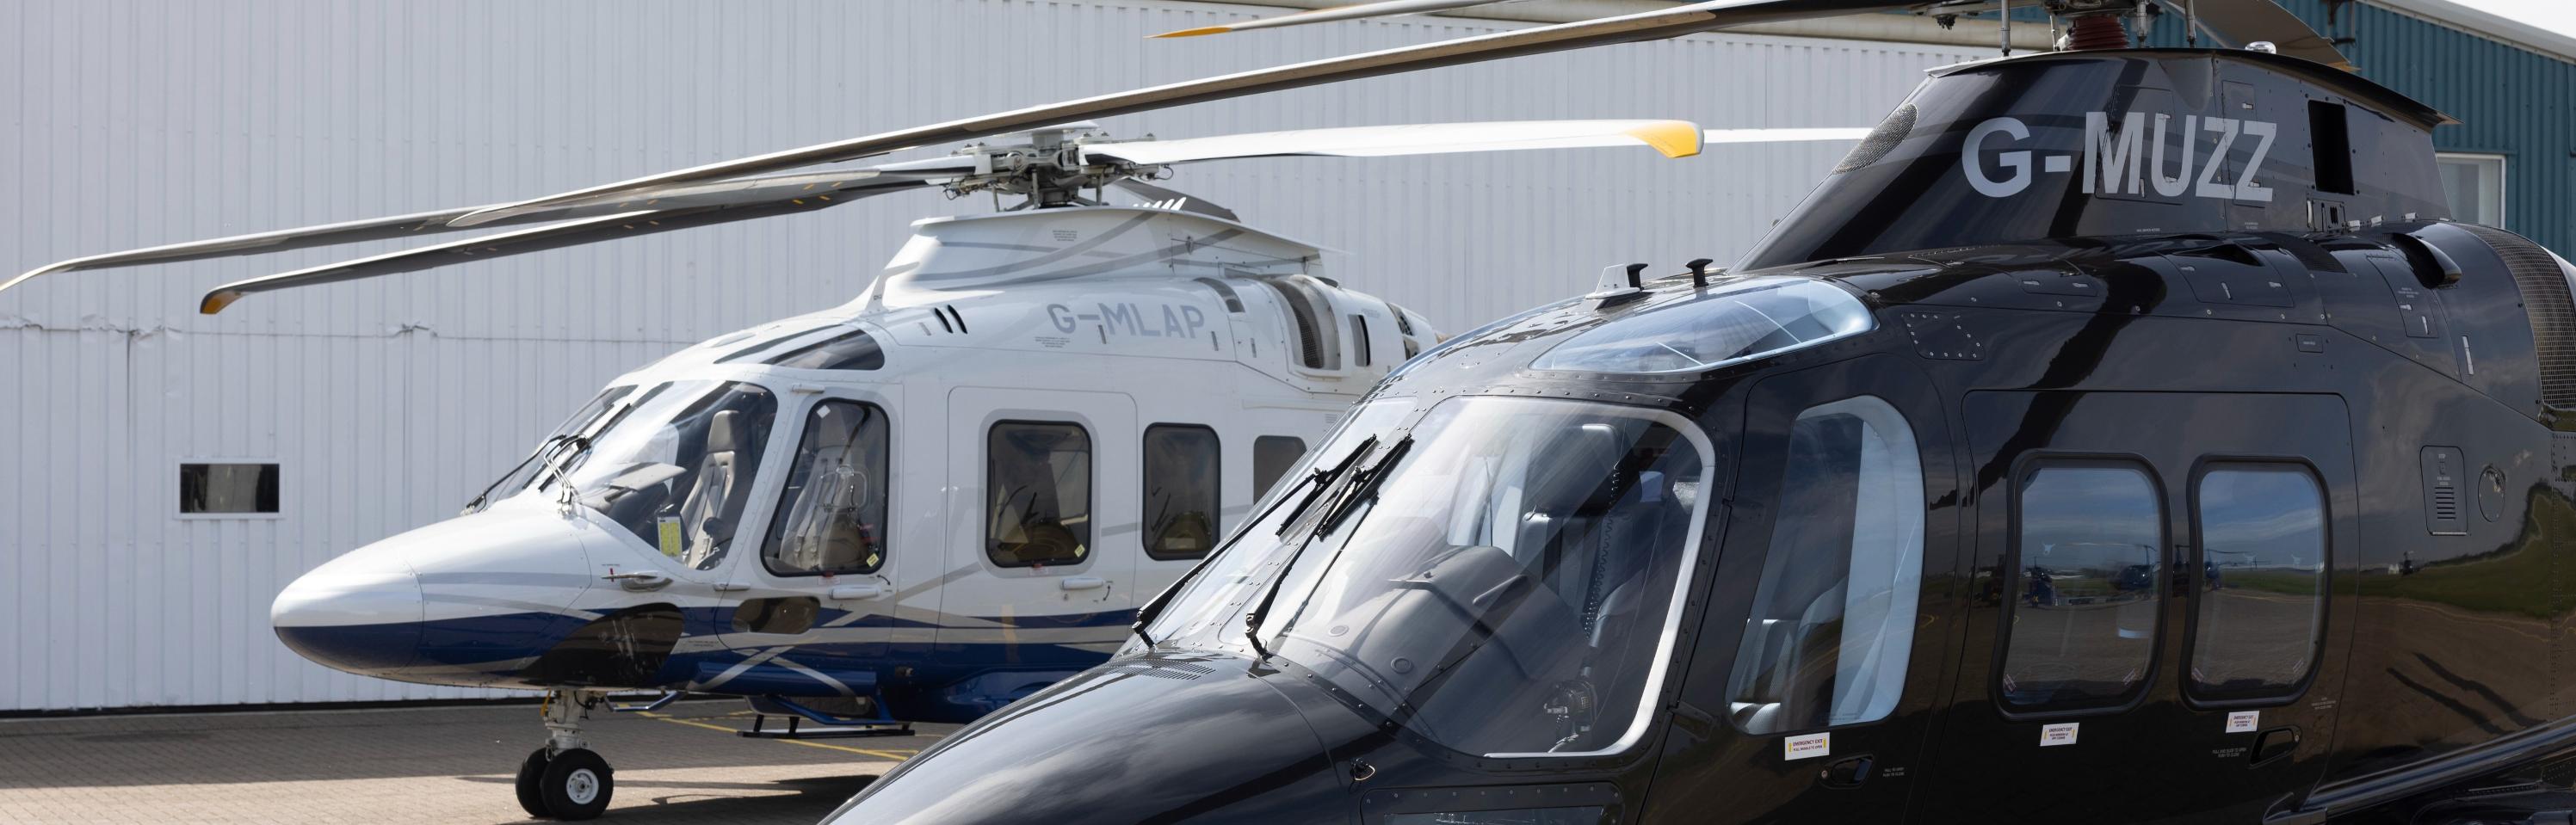 Agusta VIP helicopter in the UK and Ireland